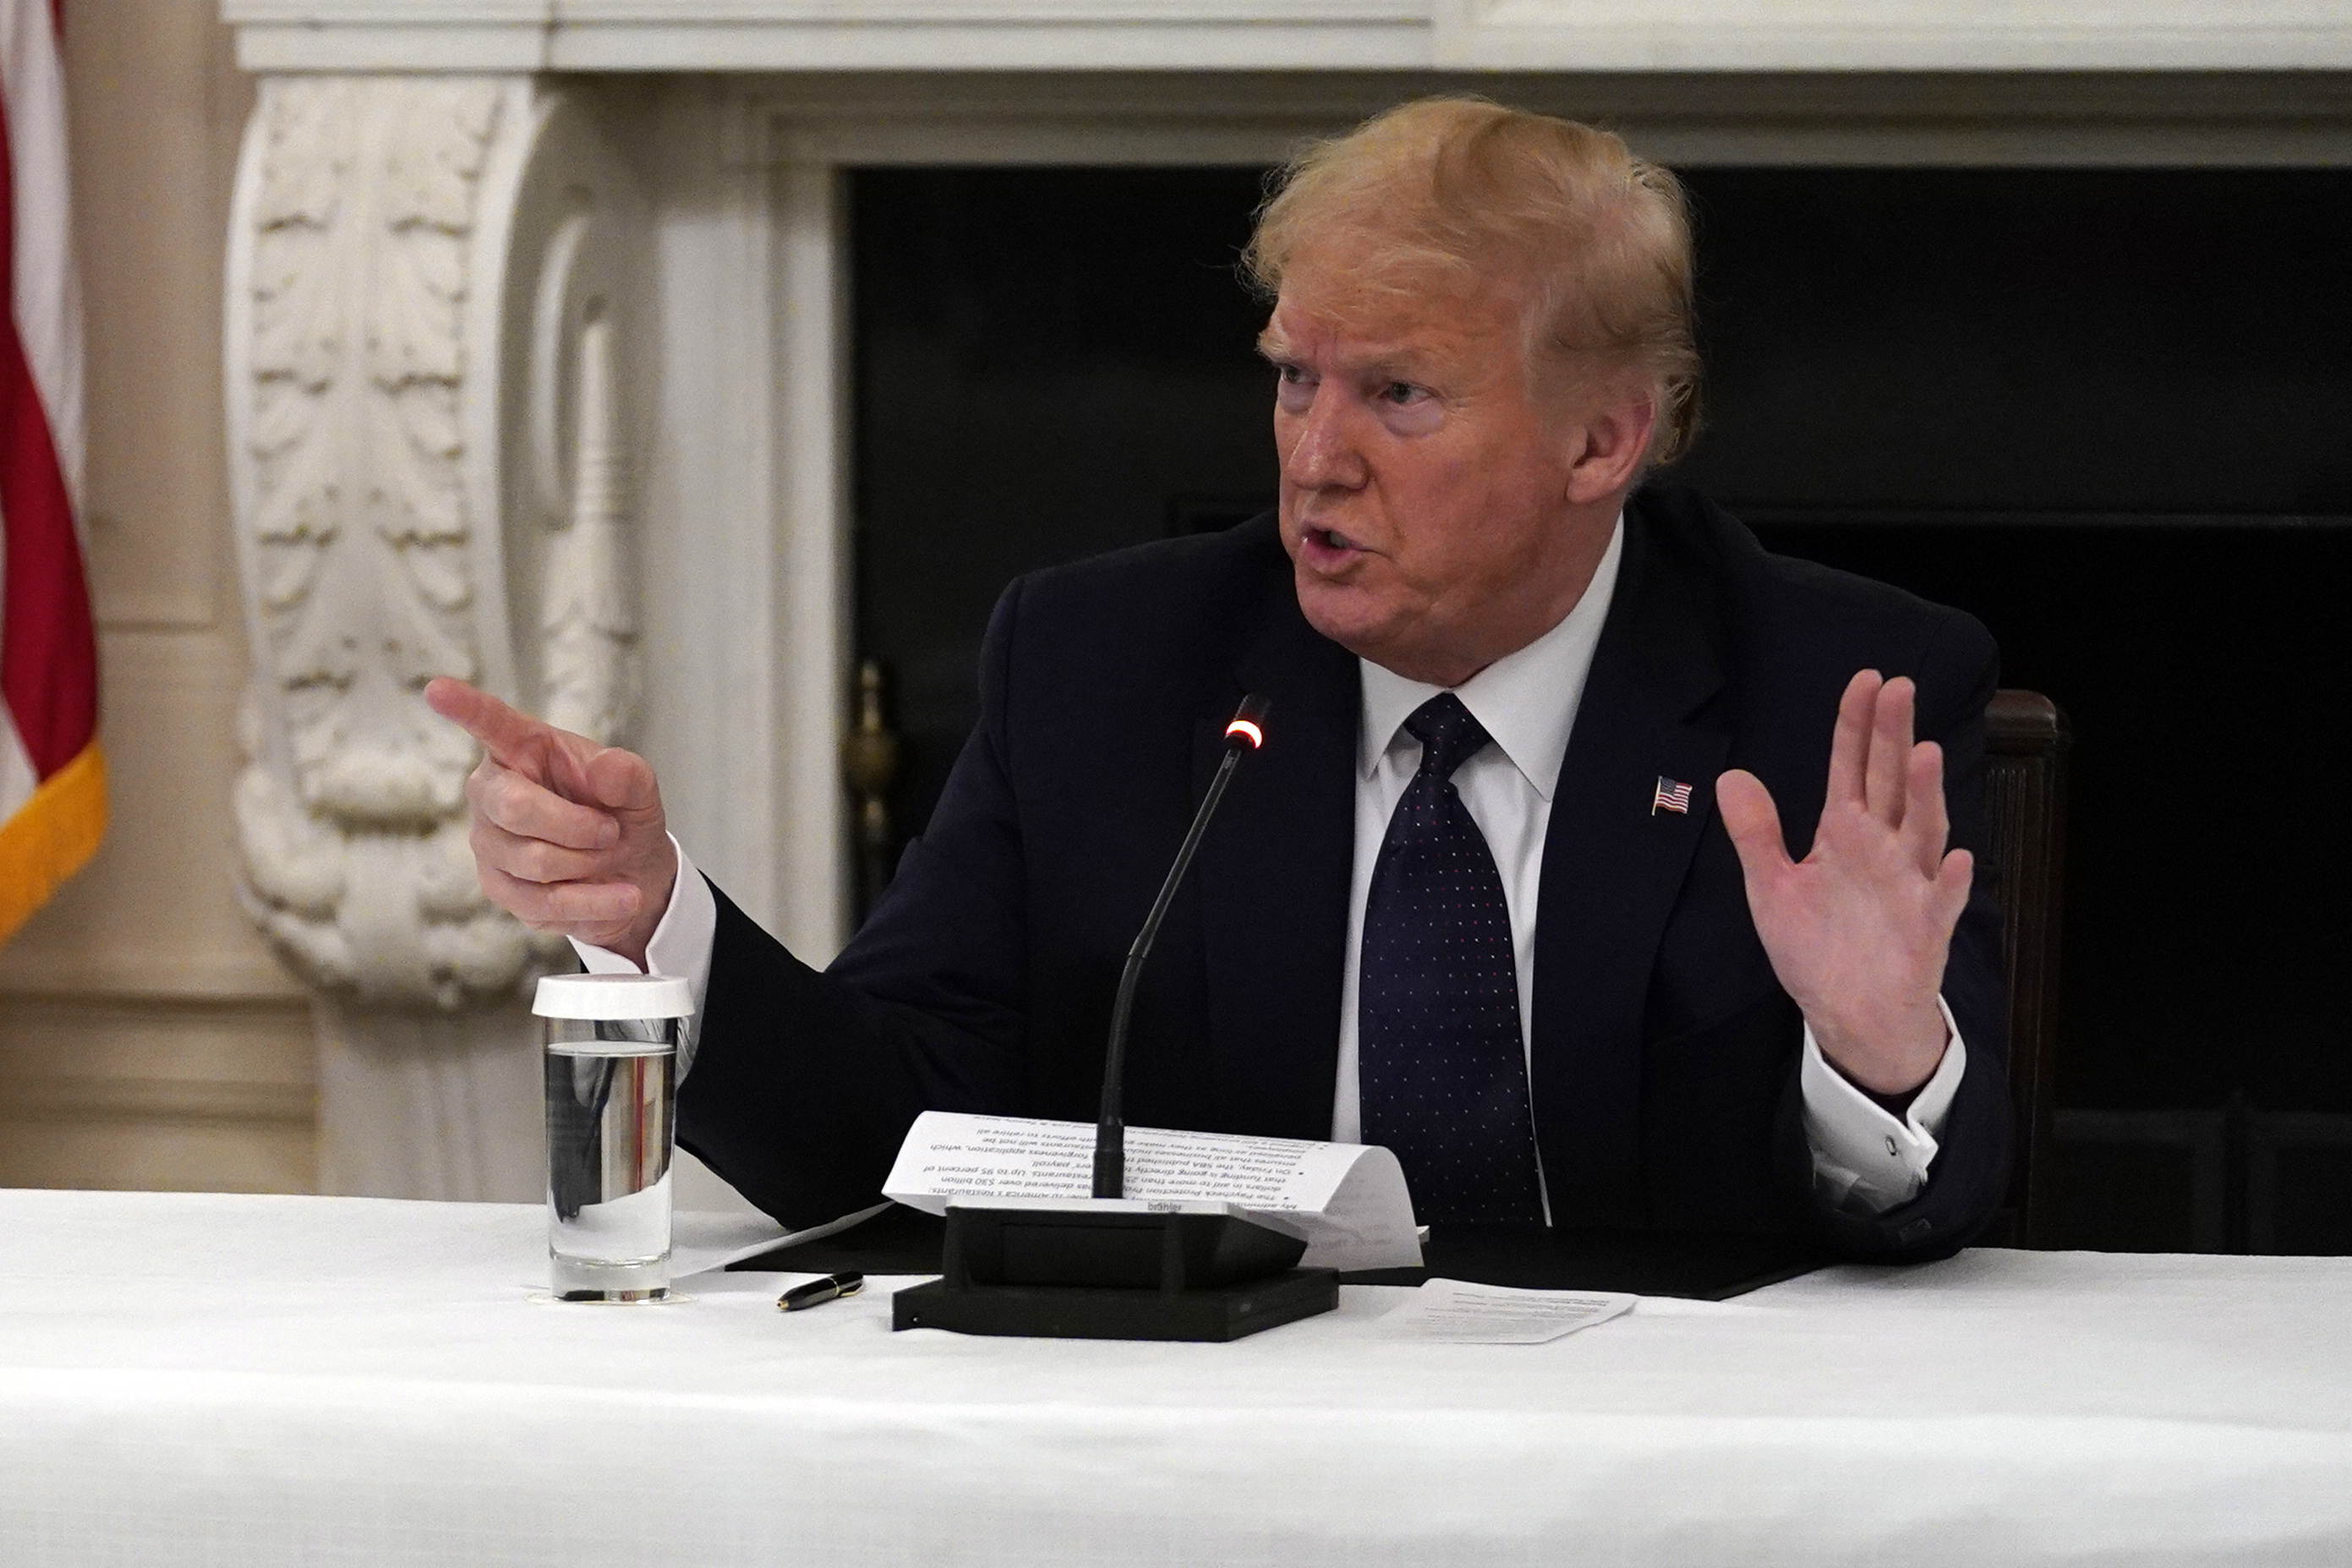 President Donald Trump tells reporters that he is taking zinc and hydroxychloroquine during a meeting with restaurant industry executives about the coronavirus response, in the State Dining Room of the White House, Monday, May 18, 2020, in Washington. (AP Photo/Evan Vucci)